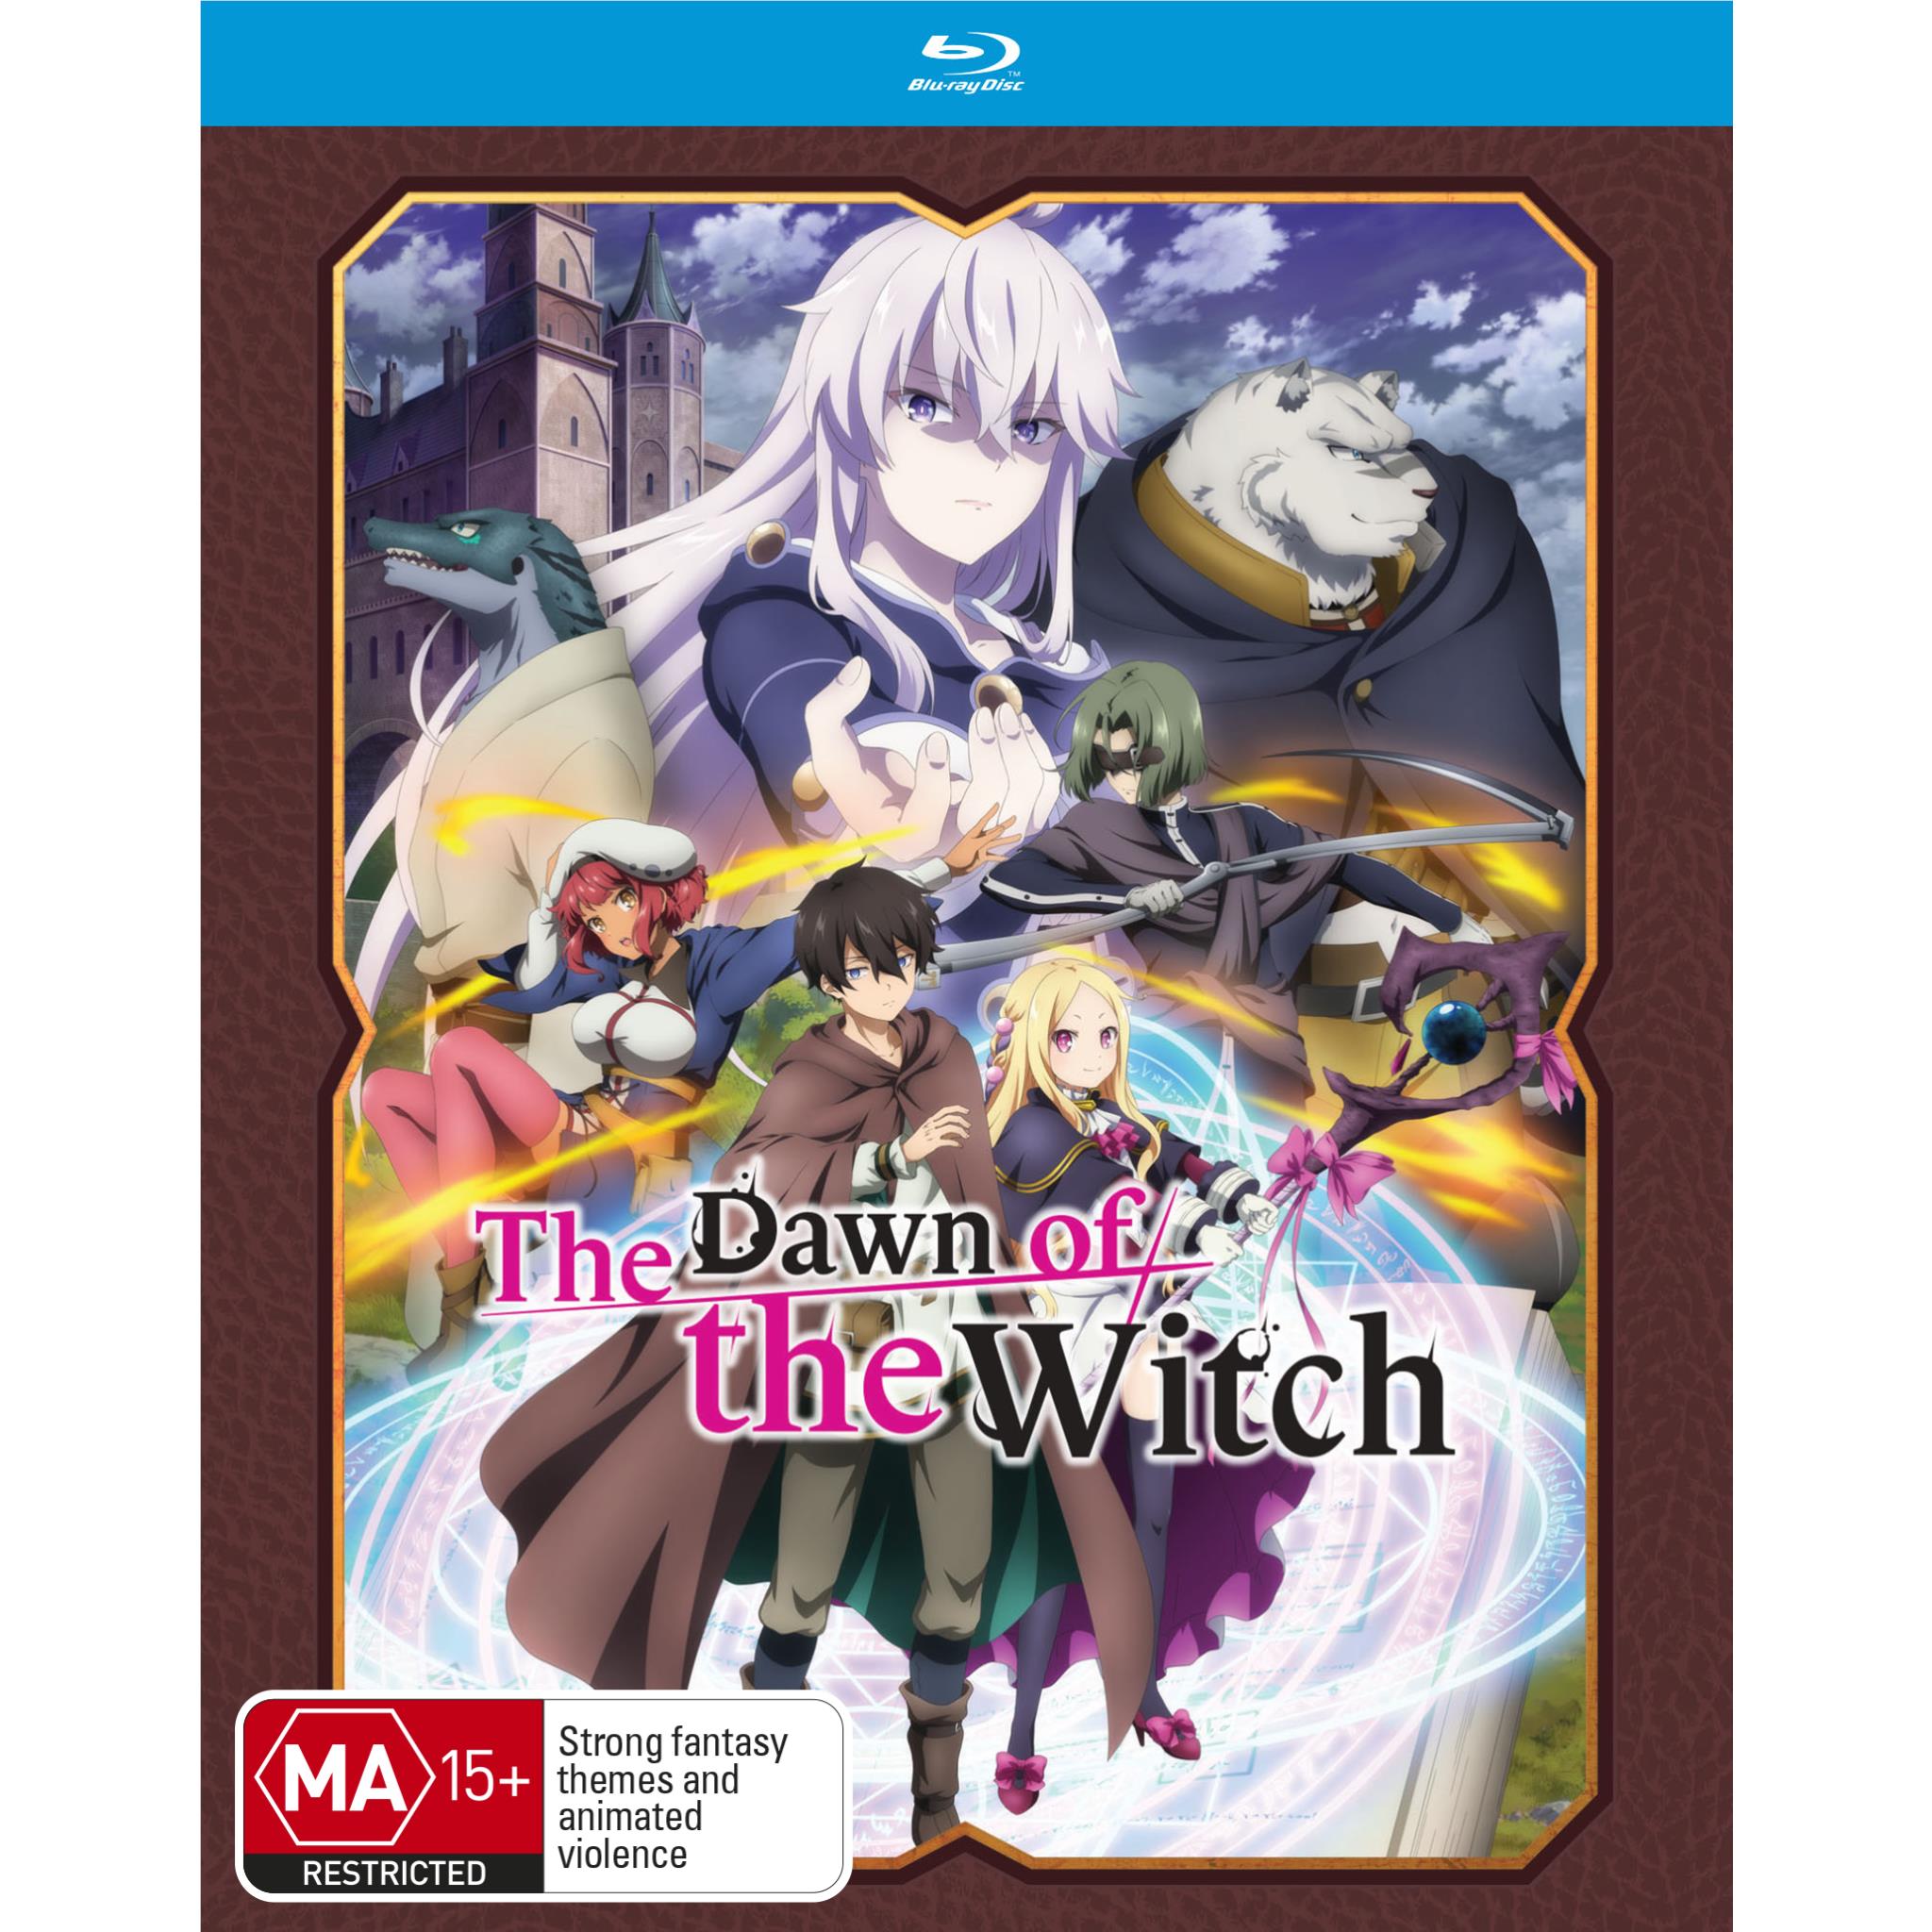 The Dawn of the Witch Animes 1st Video Reveals More Cast April 7 Premiere   News  Anime News Network